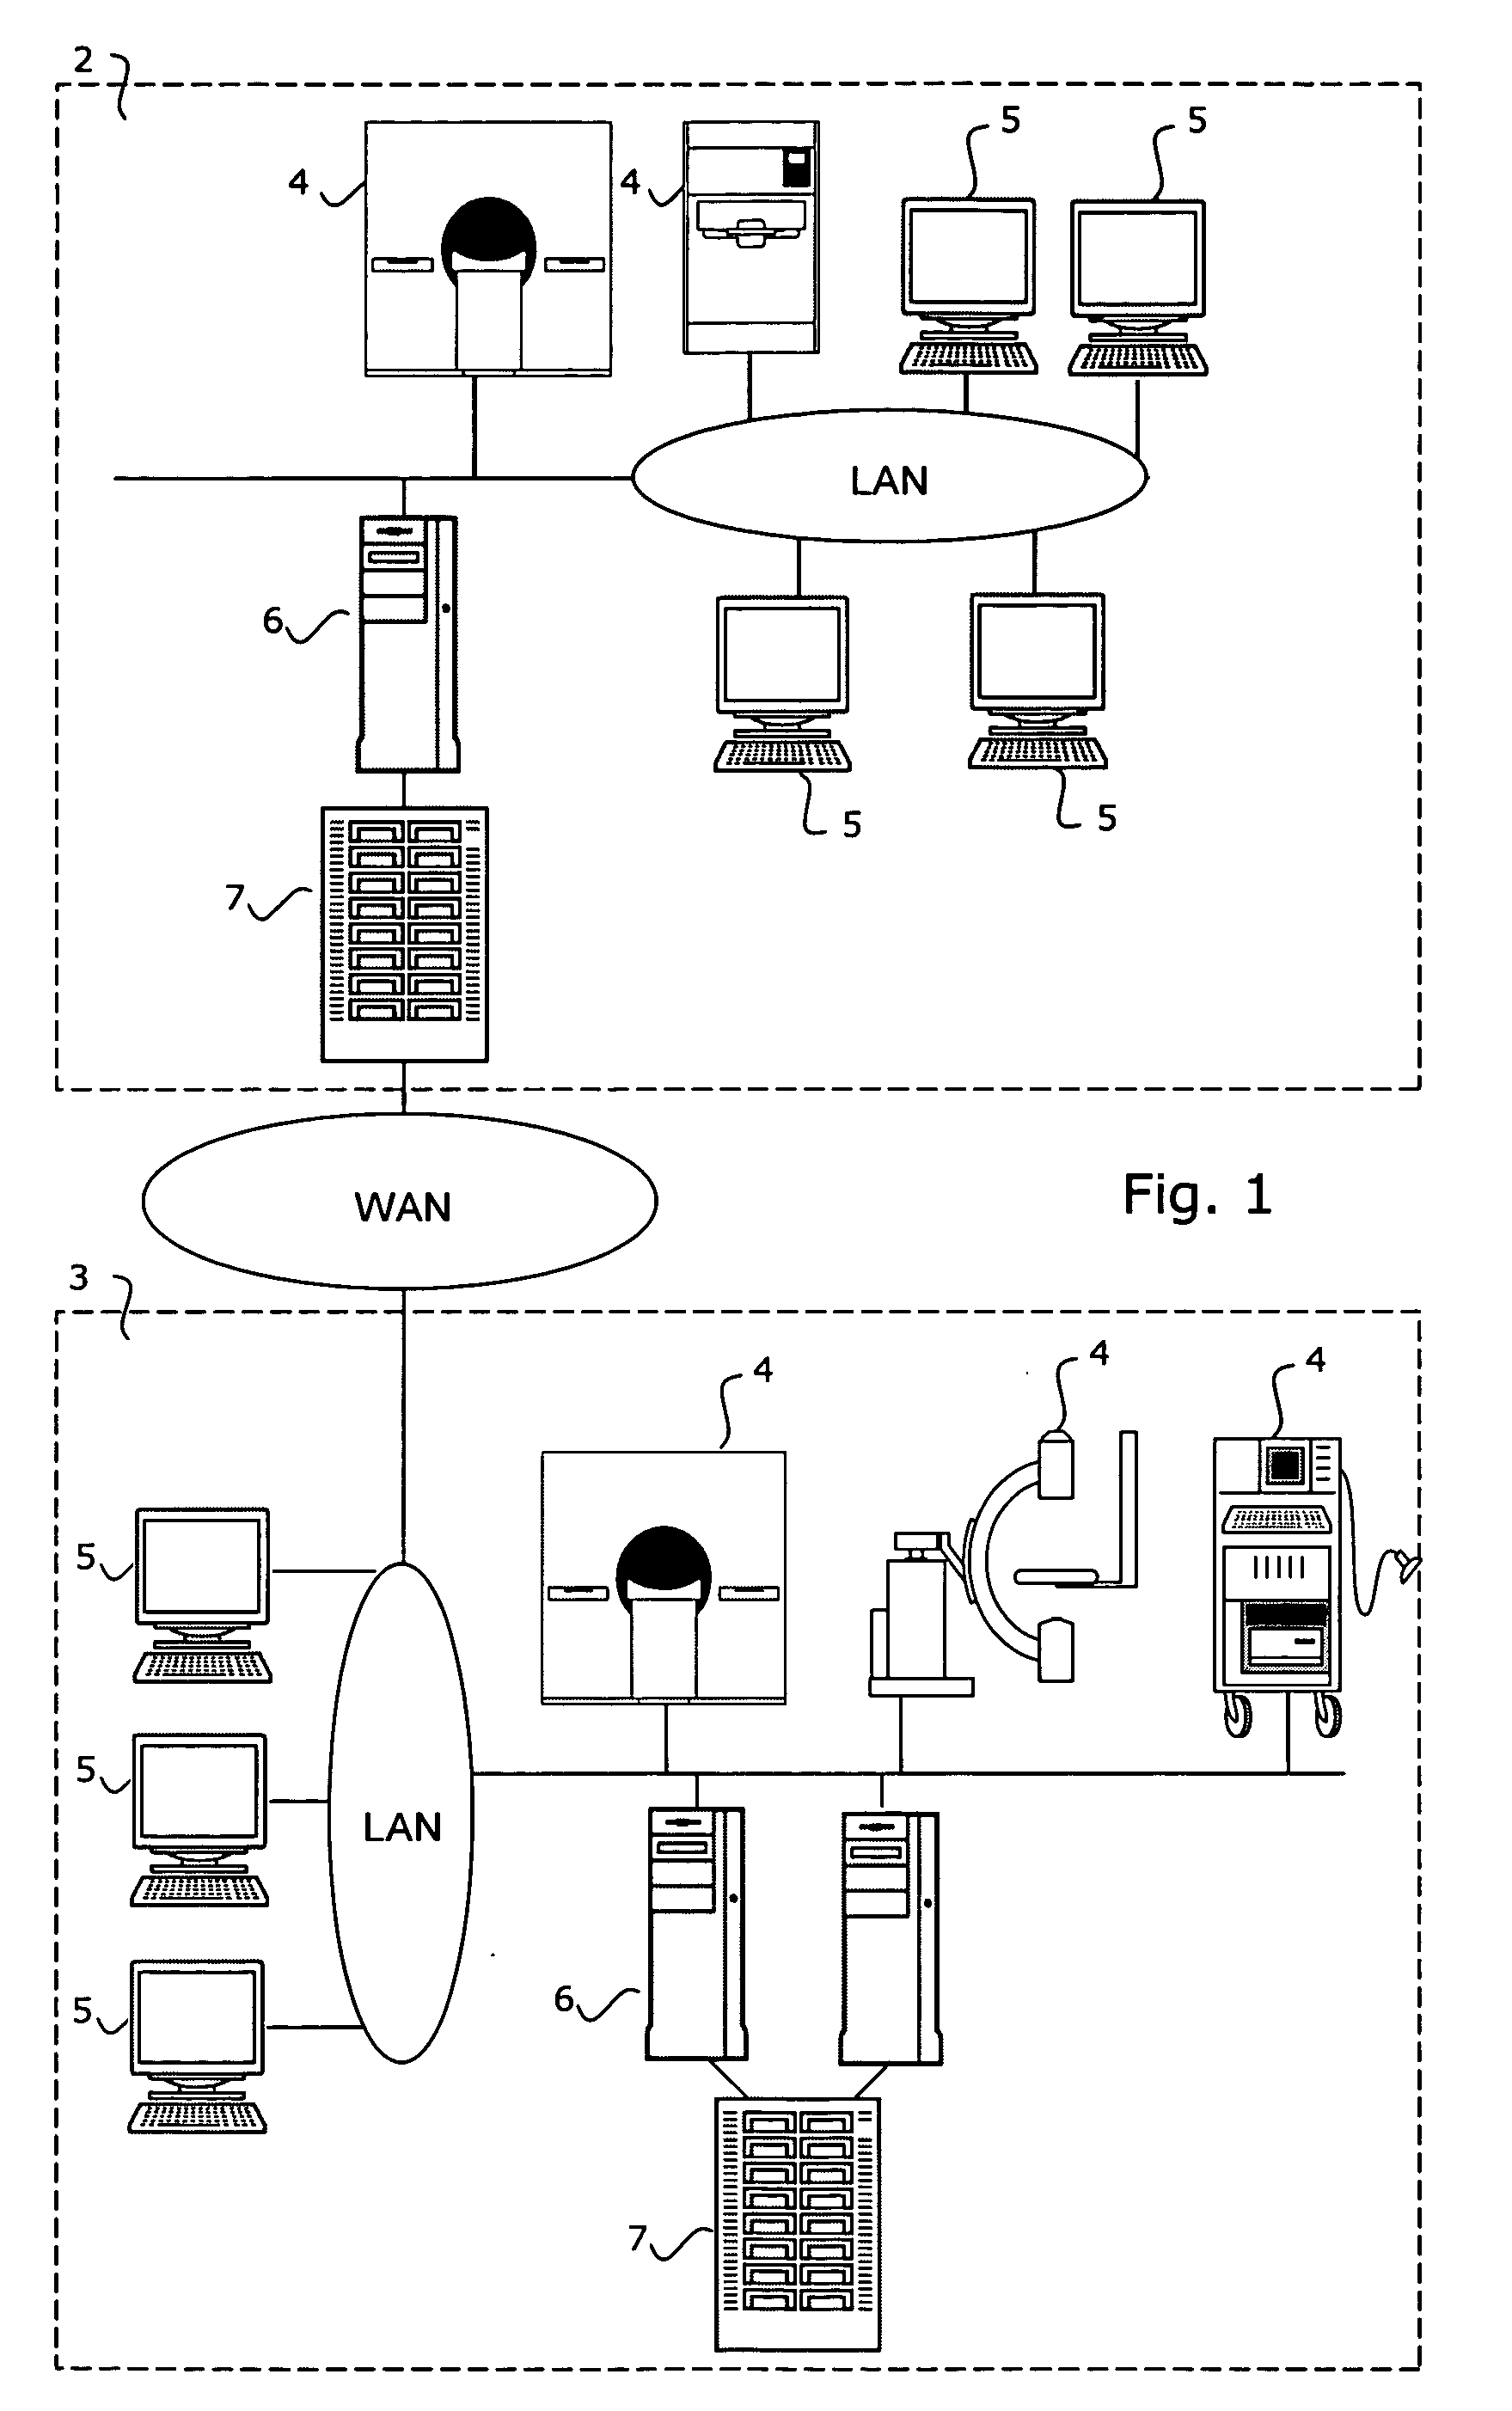 Computer program product and method for analysis of medical image data in a medical imaging system